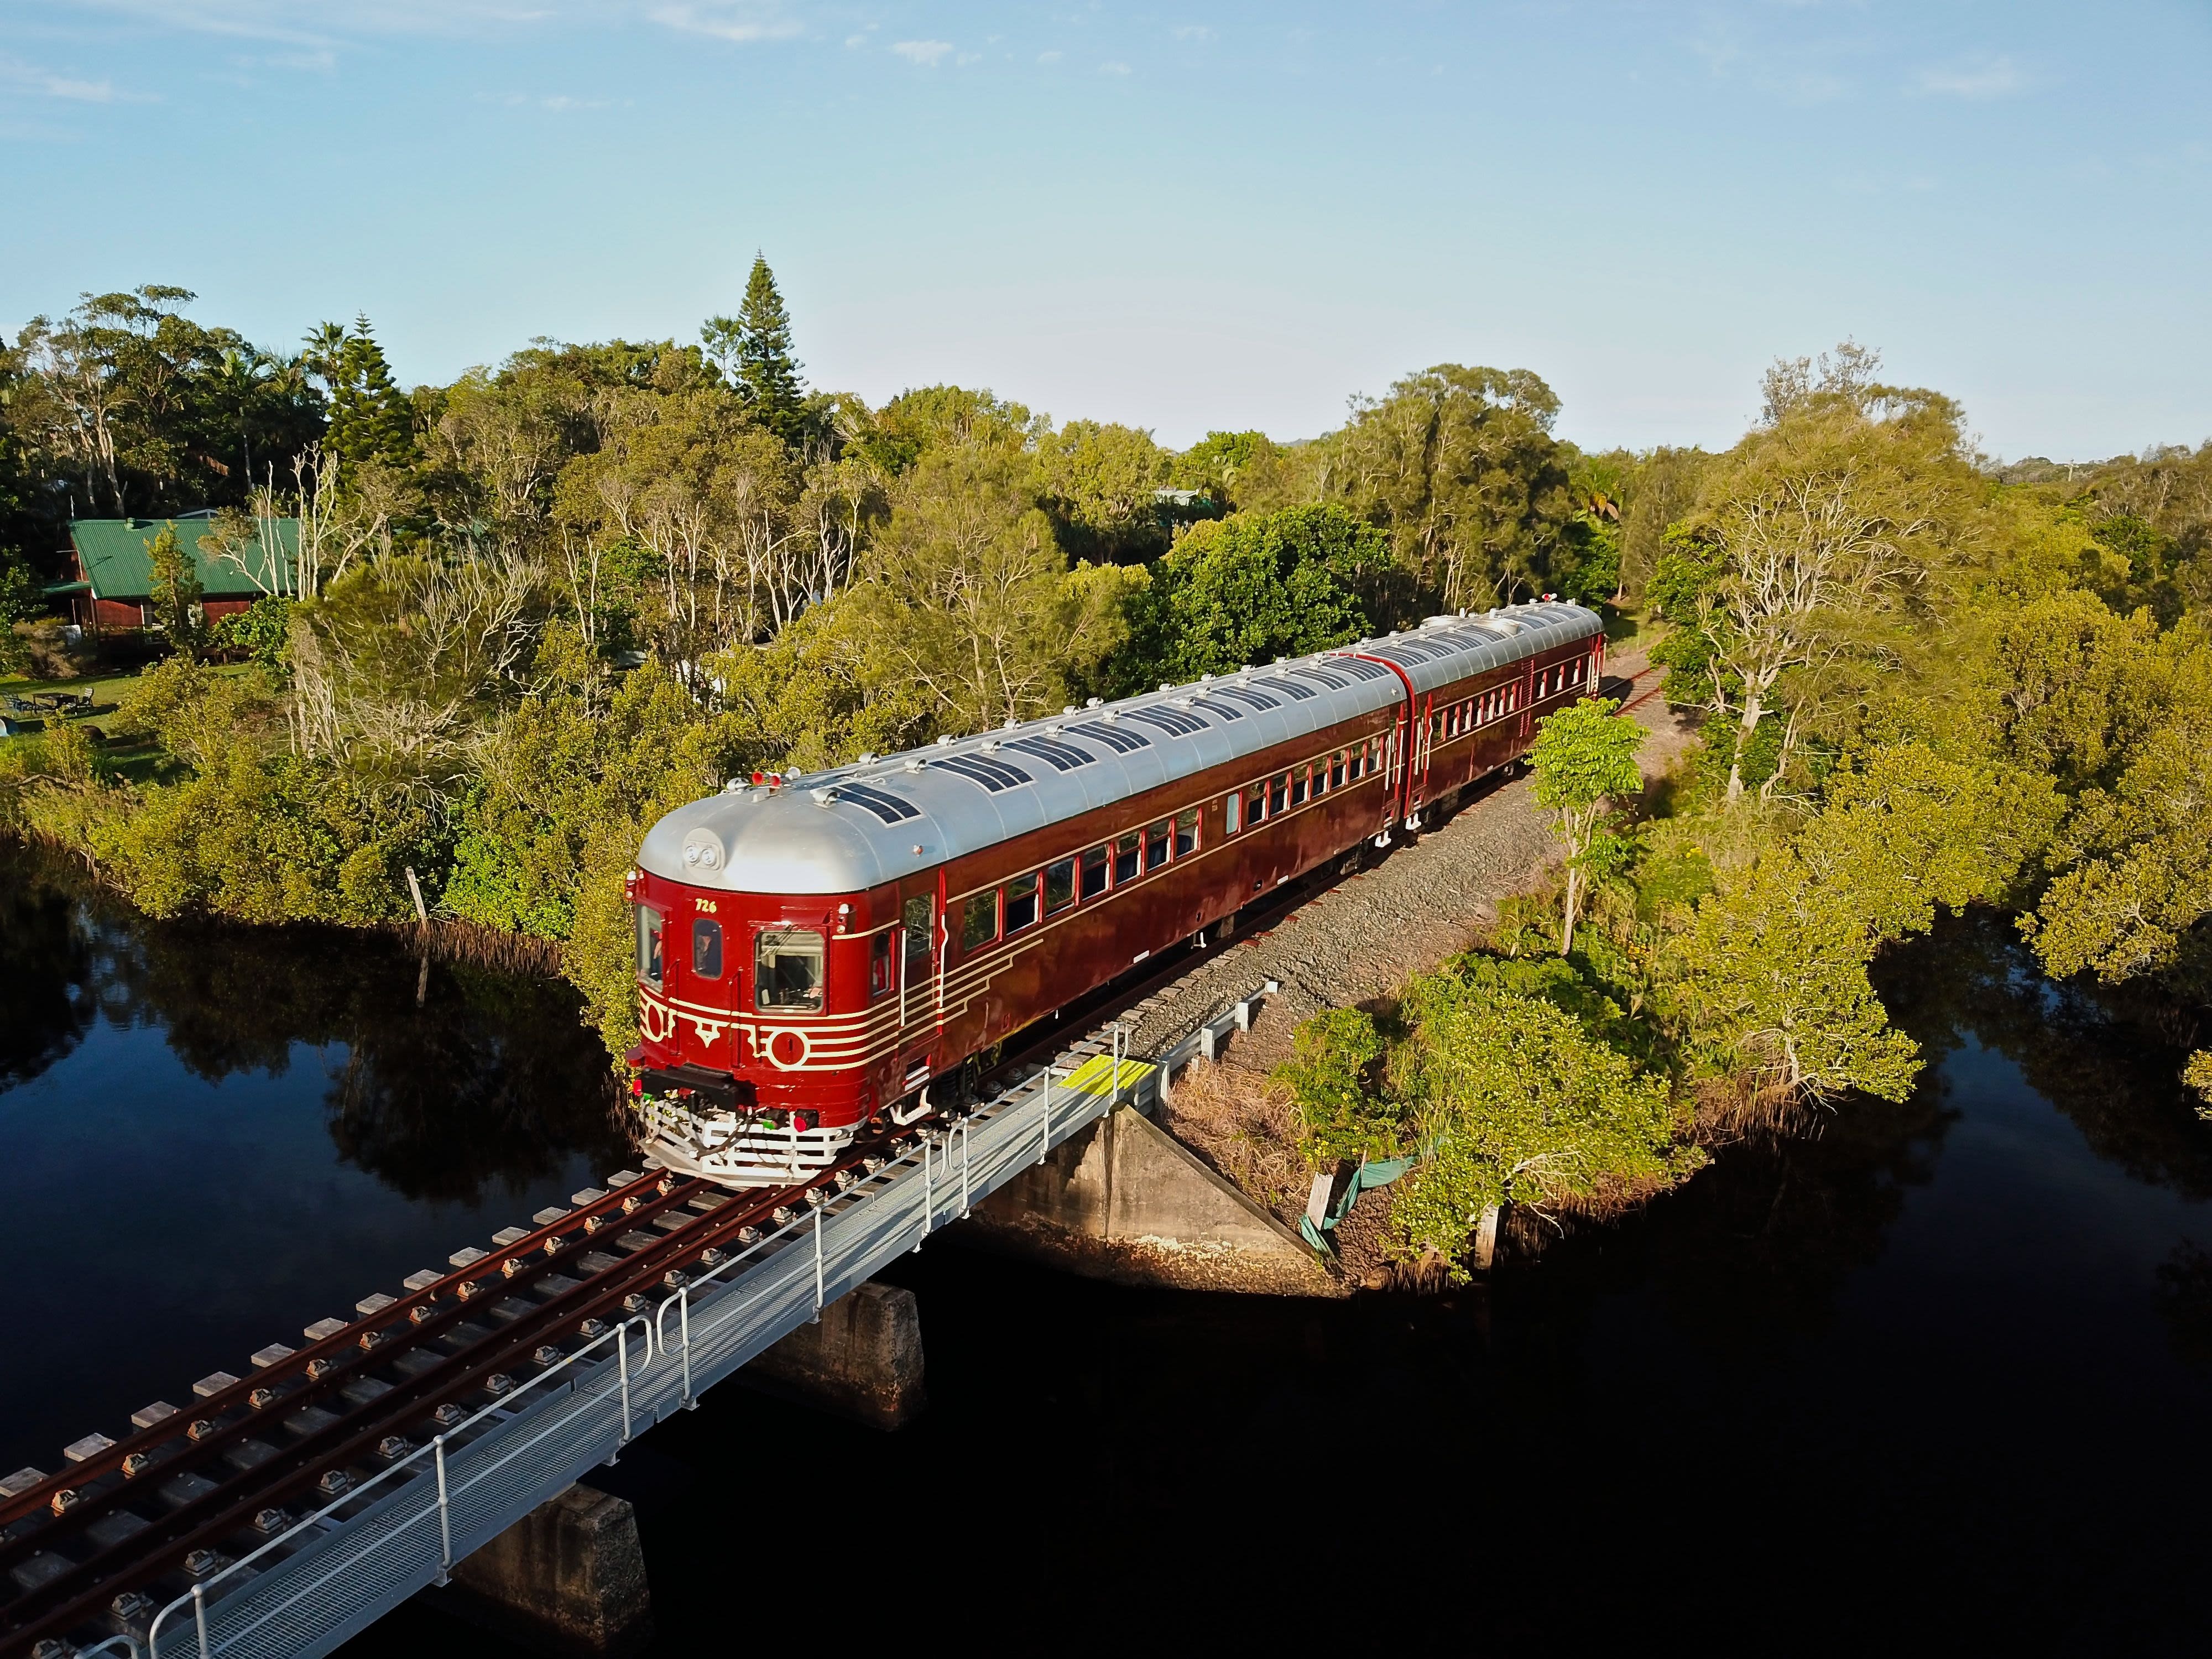 <strong>All aboard: </strong>The world's first solar-powered train has a surprisingly long history. This 1949 railcar was restored by the <a href="index.php?page=&url=https%3A%2F%2Fbyronbaytrain.com.au%2F" target="_blank" target="_blank">Byron Bay Train</a> company in 2013 and fitted with rooftop solar panels two years later. It runs emission-free trips between the town center and a beach in Byron Bay, Australia.